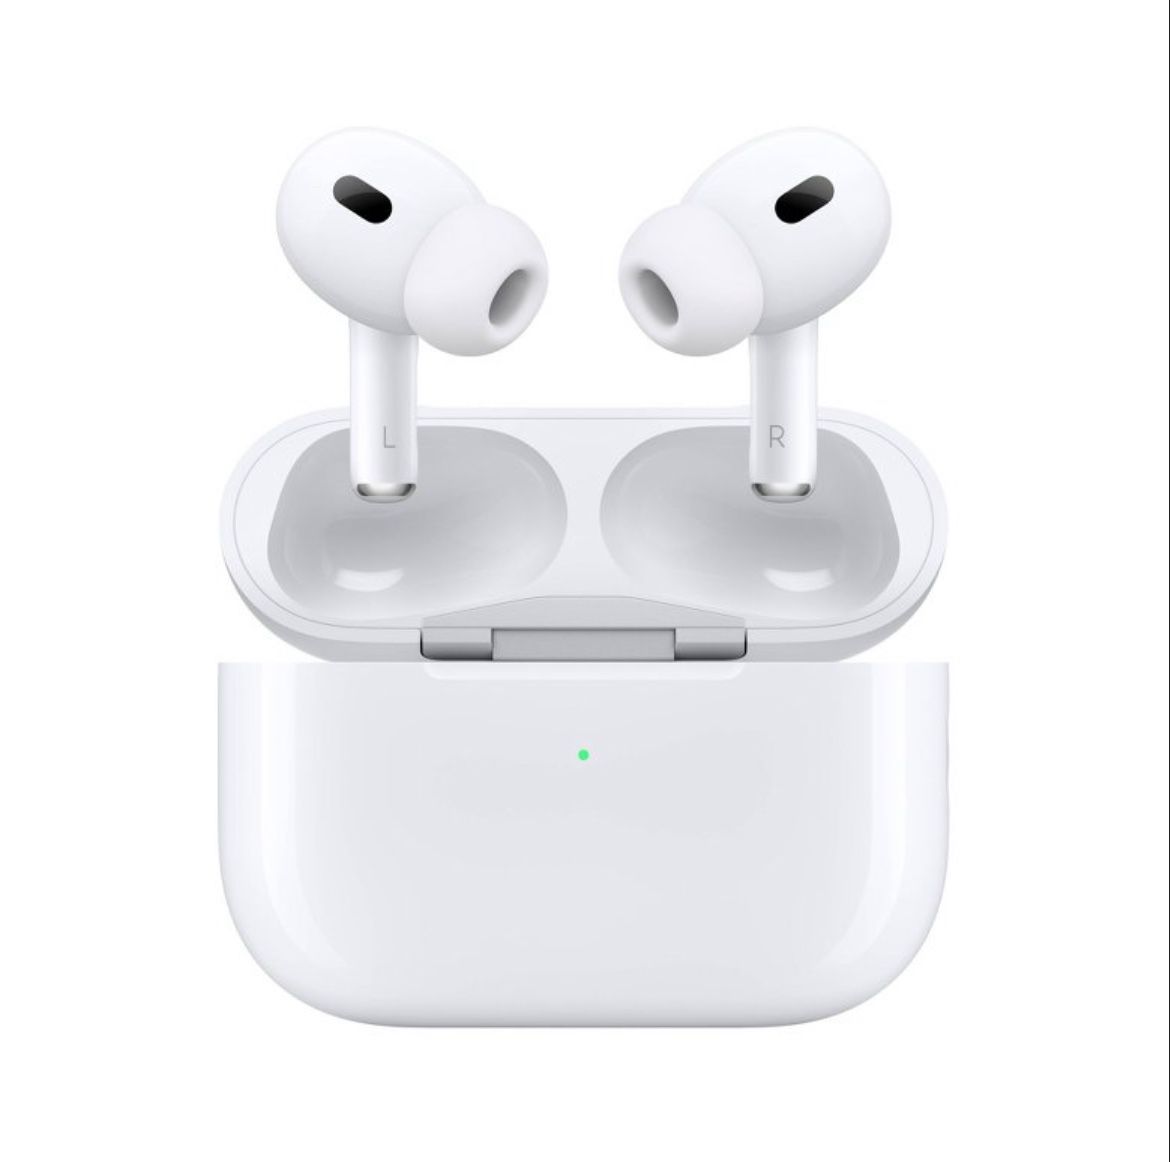 Brand New AirPods Pro (2nd Generation) With MagSafe Case ( USB-C)  & 2year Apple Care Included $ 200 OBO